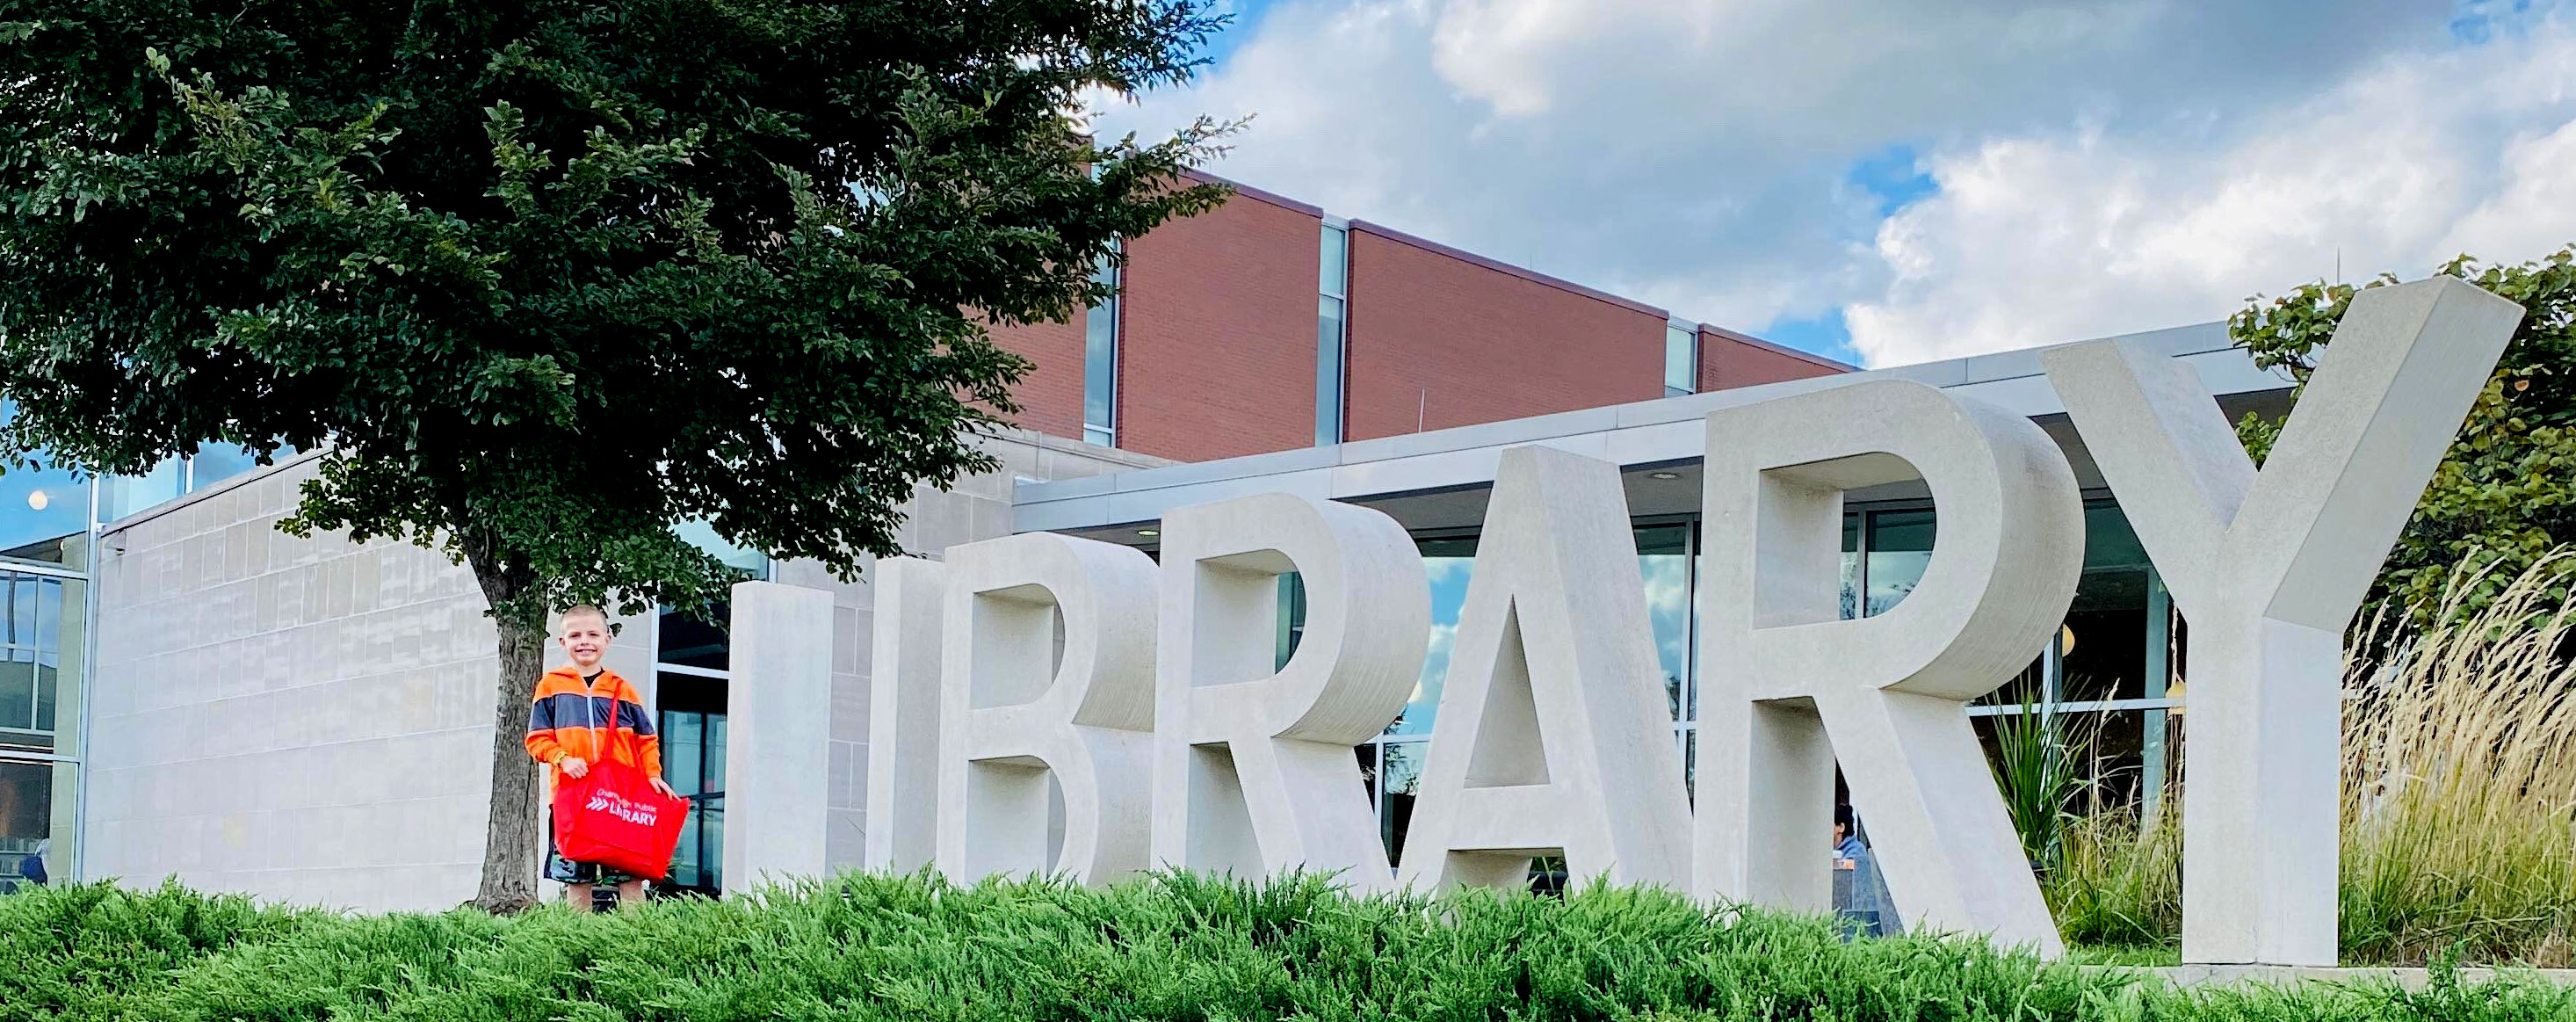 smiling boy stands by LIBRARY sign outside